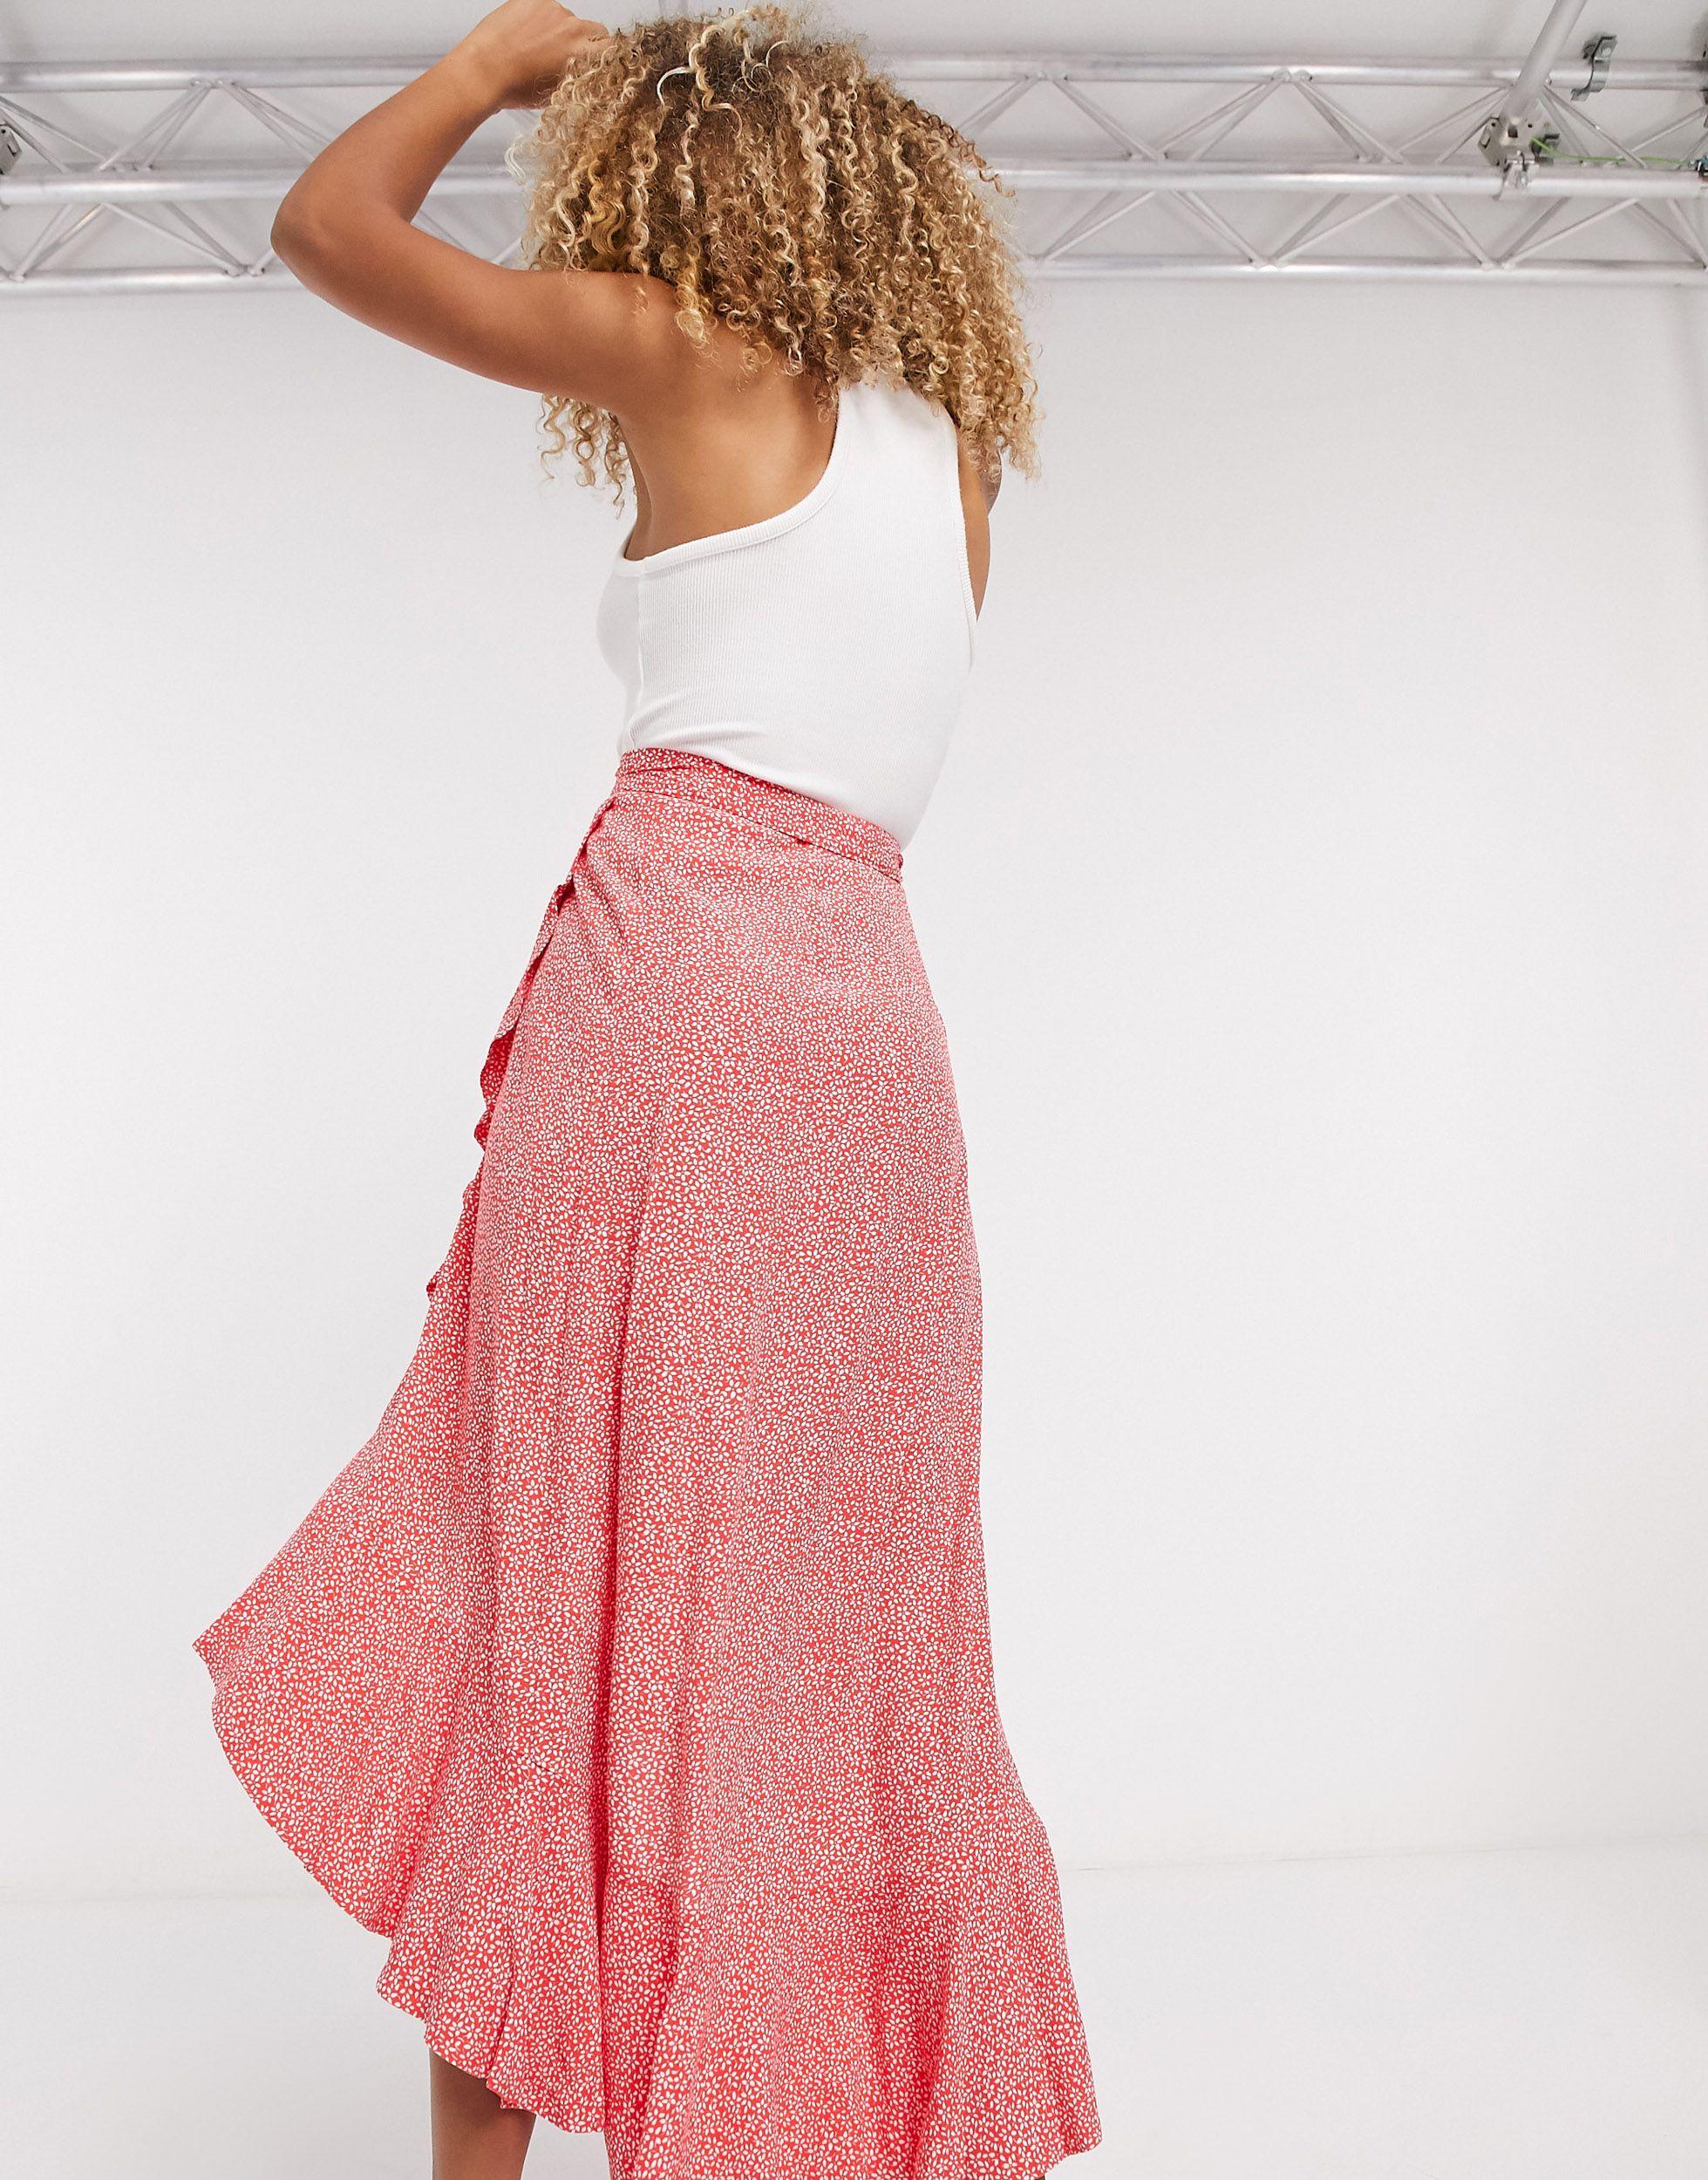 ☀ Other Stories Ruffle Wrap Maxi Skirt ...